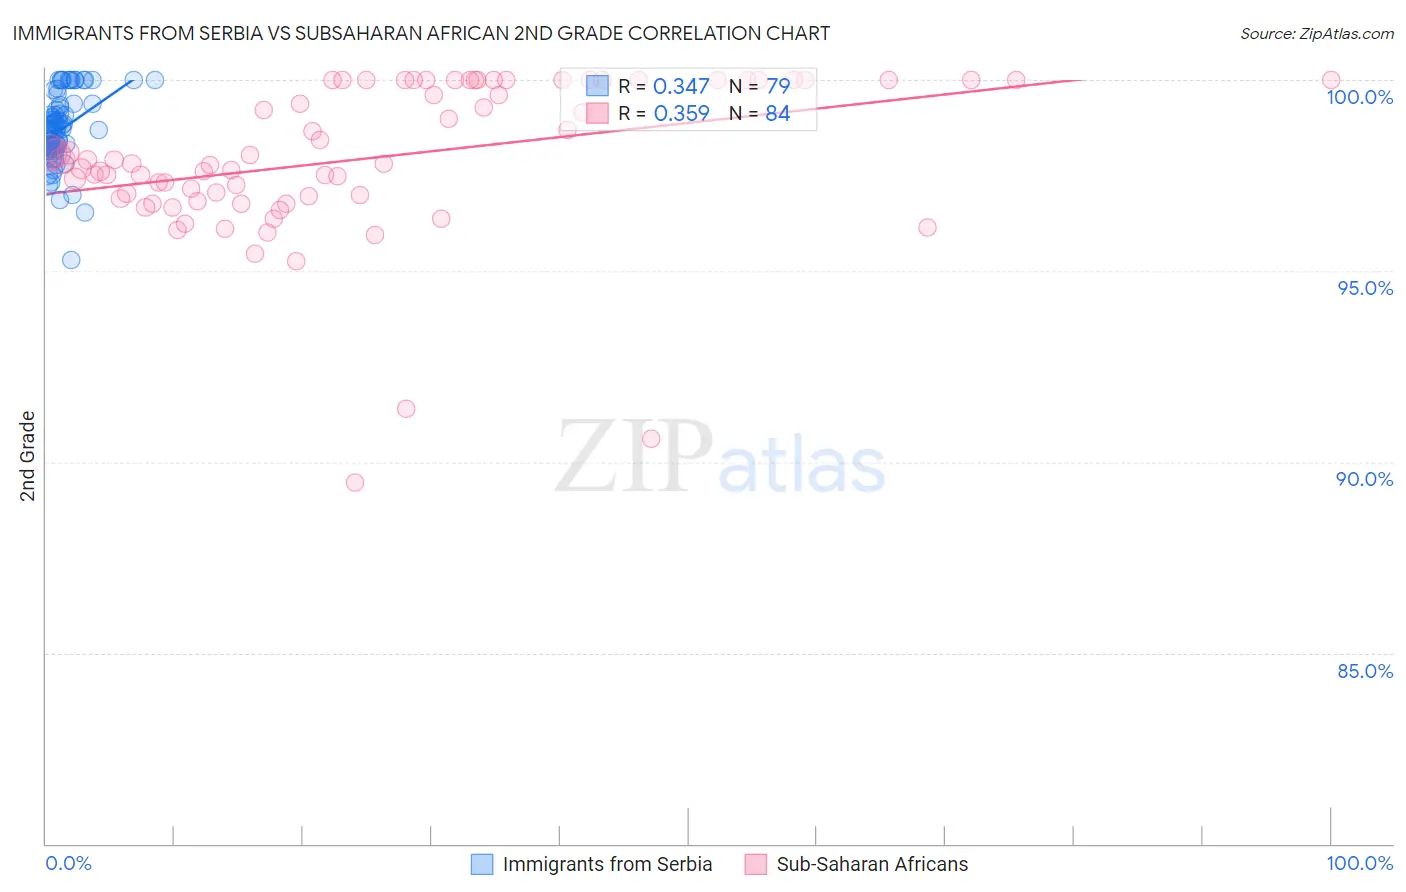 Immigrants from Serbia vs Subsaharan African 2nd Grade